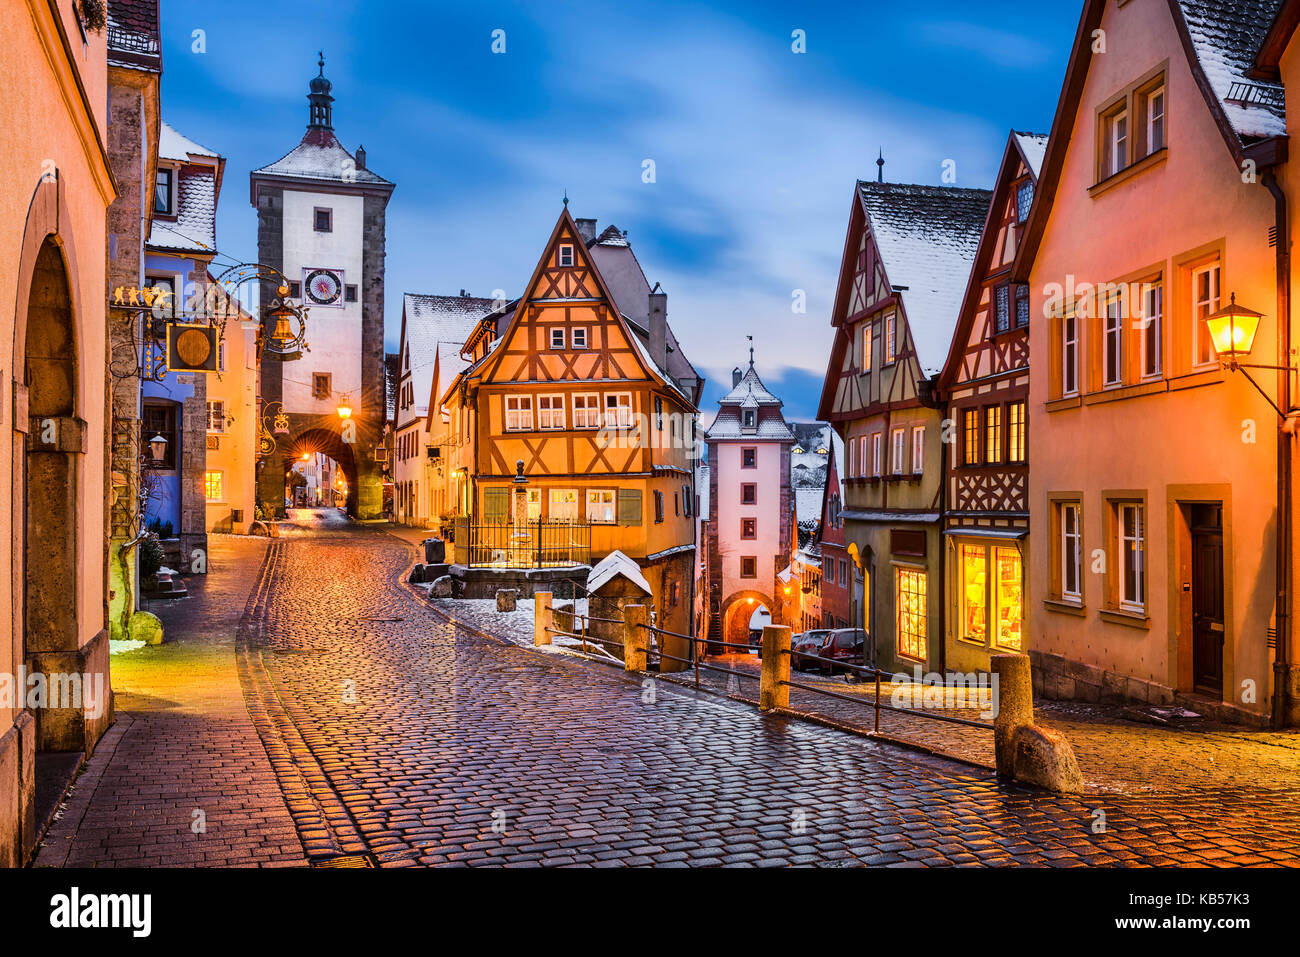 Medieval town of Rothenburg ob der Tauber at night, Germany Stock Photo